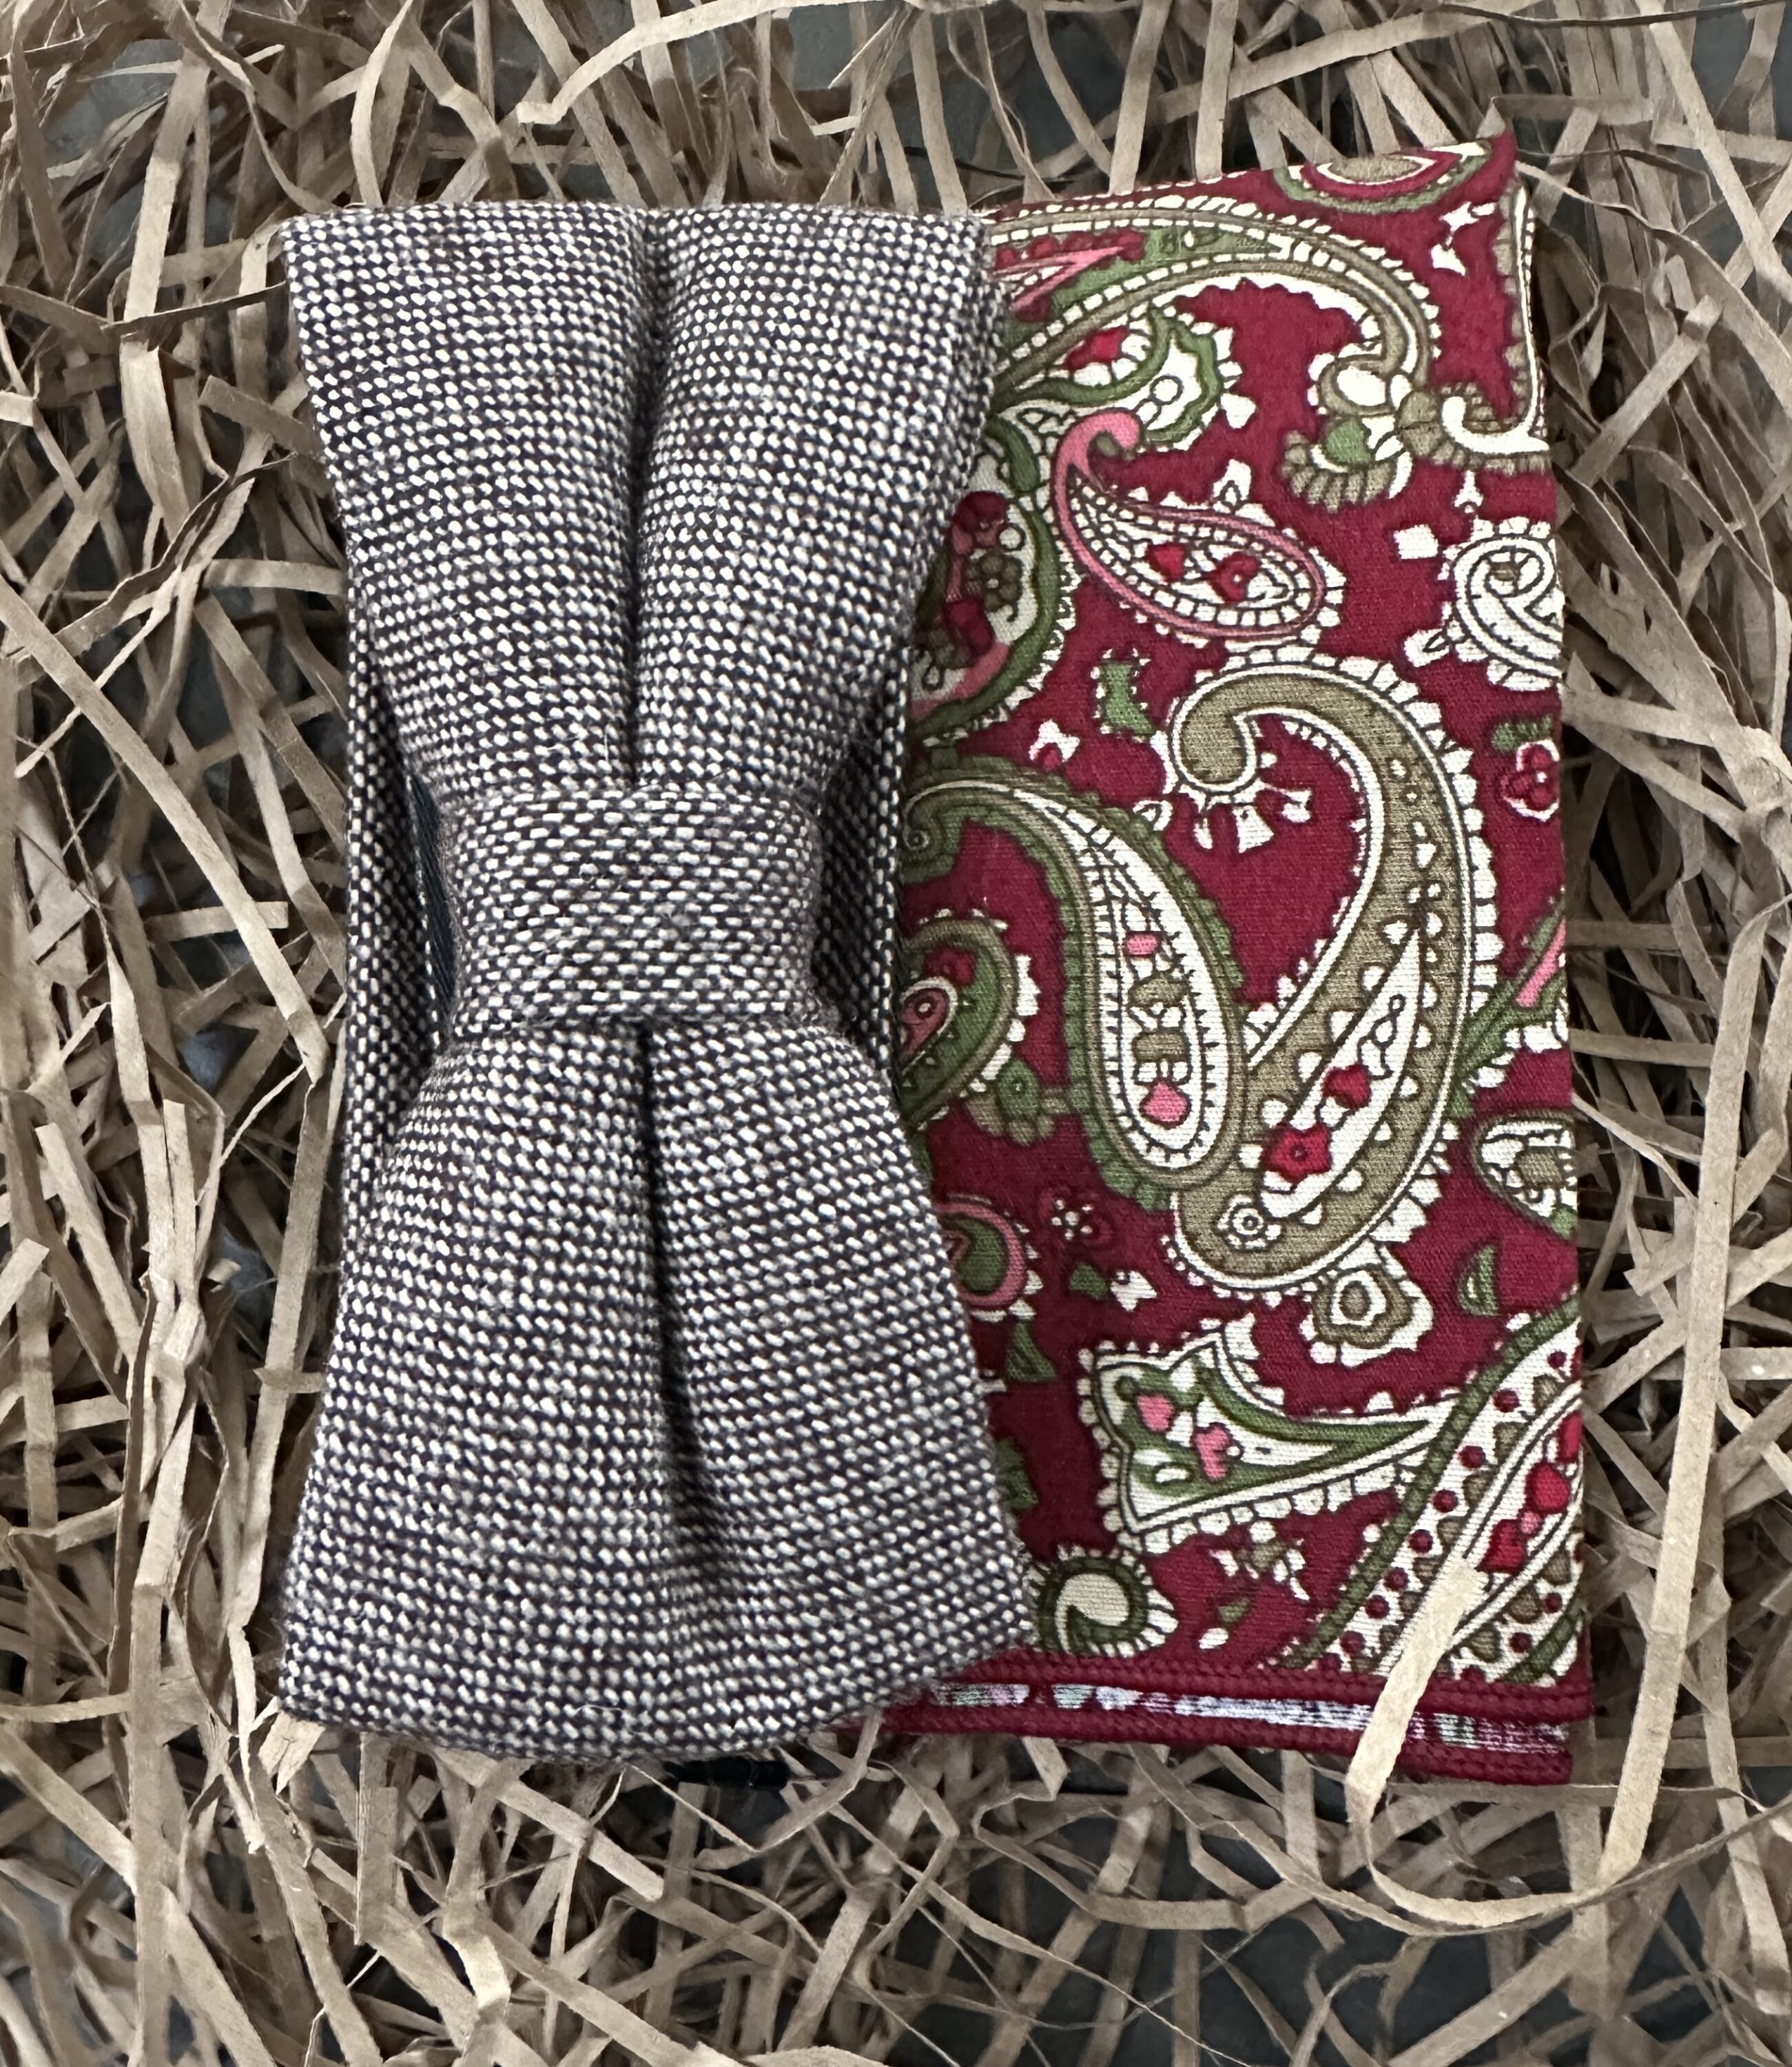 An almond wool bow tie and paisley pocket square for mens gifts and wedding attire